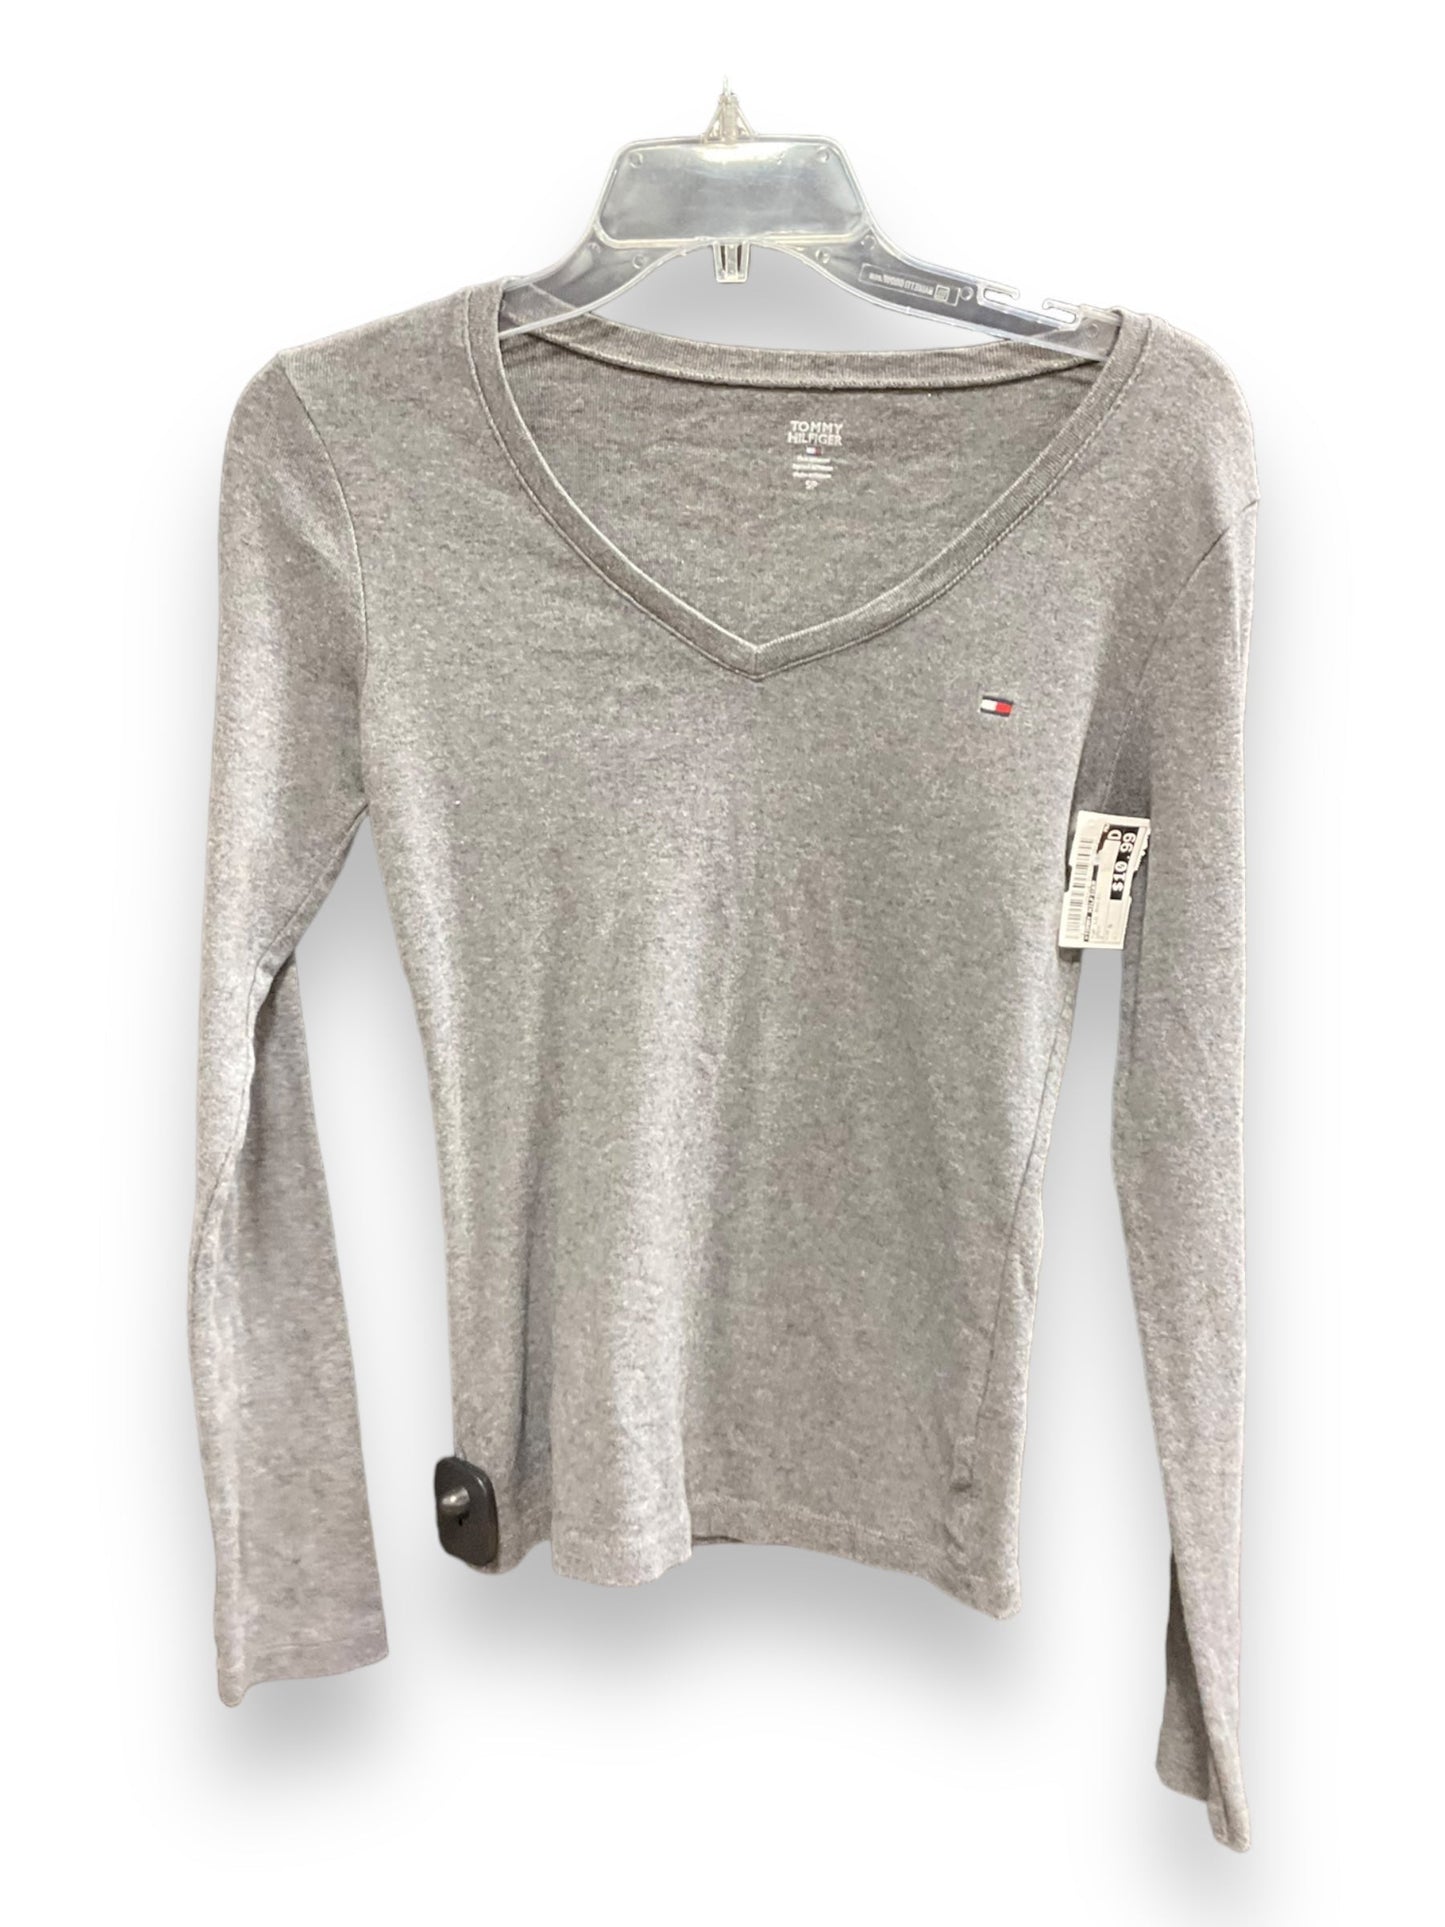 Grey Top Long Sleeve Basic Tommy Hilfiger, Size S